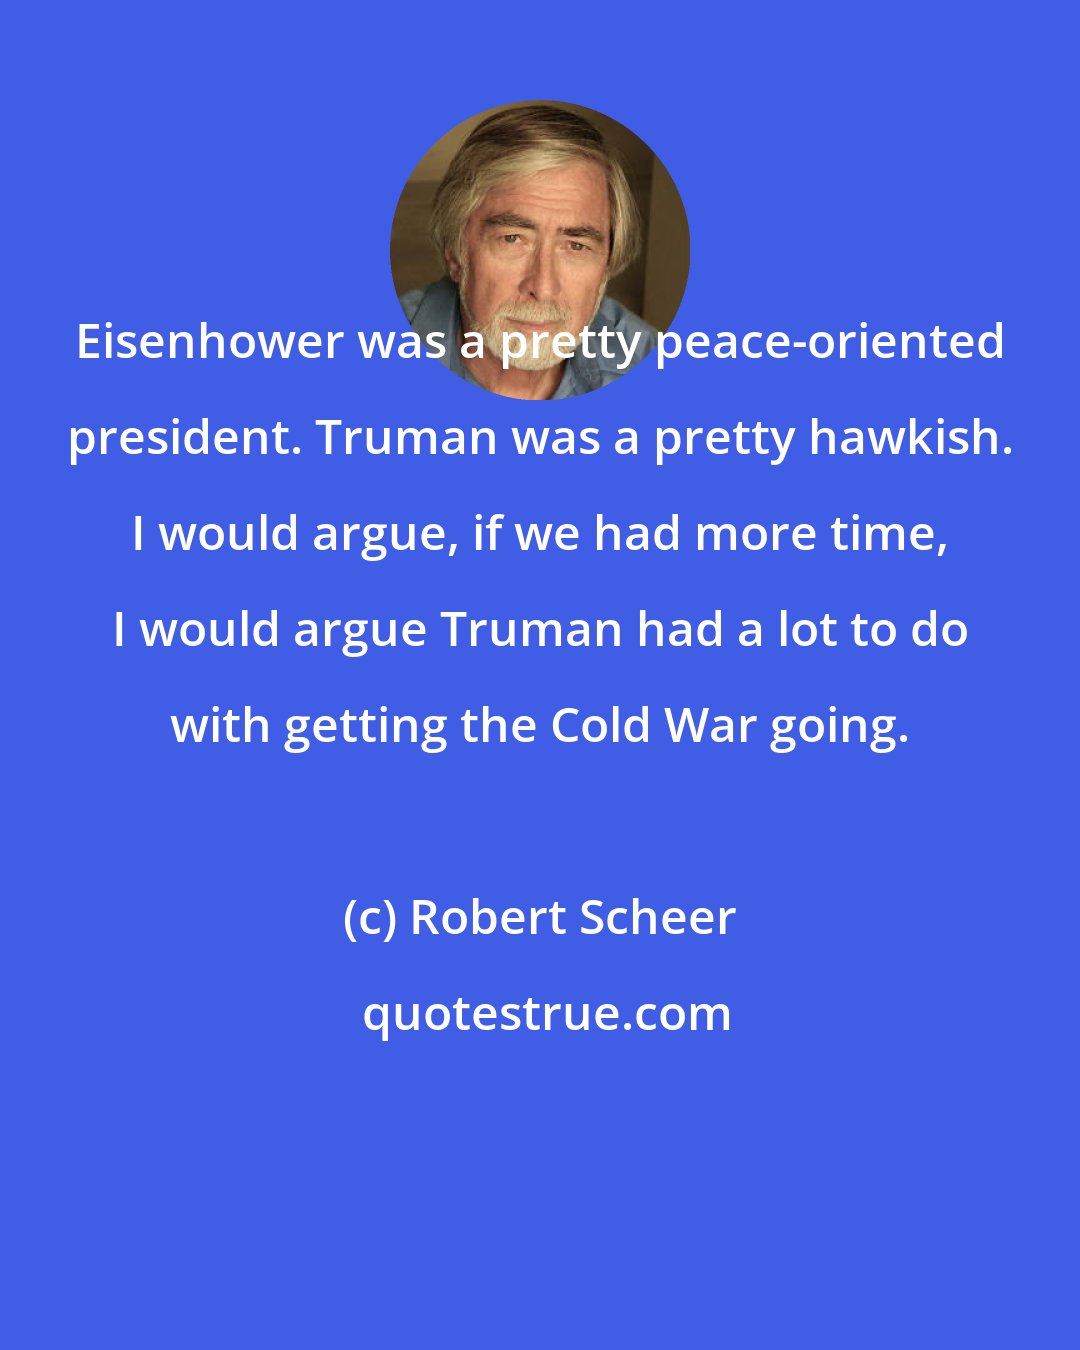 Robert Scheer: Eisenhower was a pretty peace-oriented president. Truman was a pretty hawkish. I would argue, if we had more time, I would argue Truman had a lot to do with getting the Cold War going.